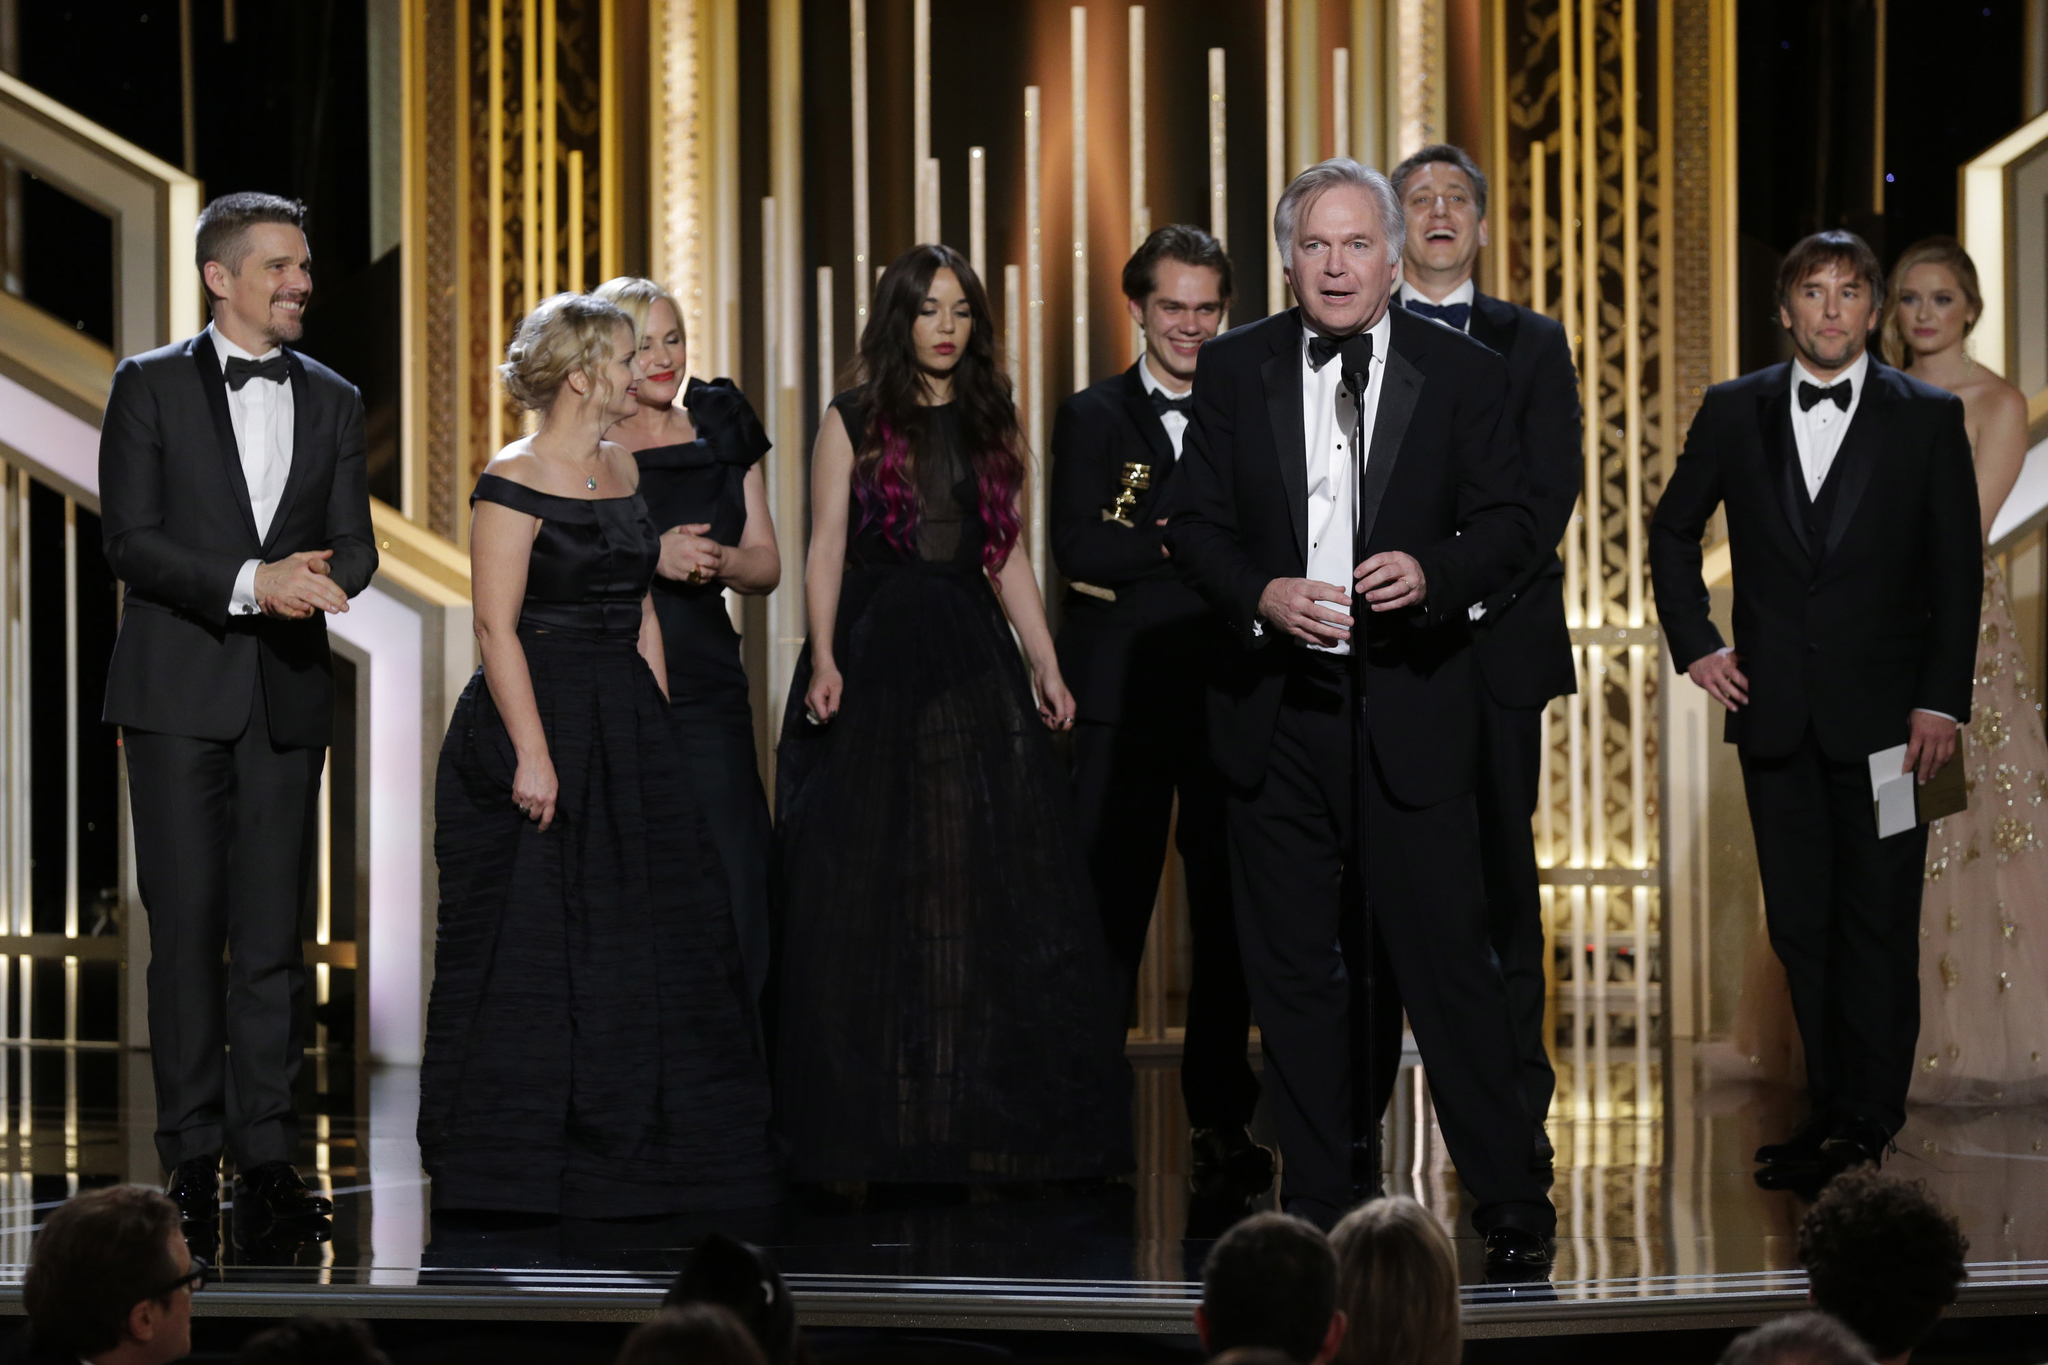 Patricia Arquette, Ethan Hawke, Richard Linklater, Jonathan Sehring, Lorelei Linklater and Ellar Coltrane at event of 72nd Golden Globe Awards (2015)